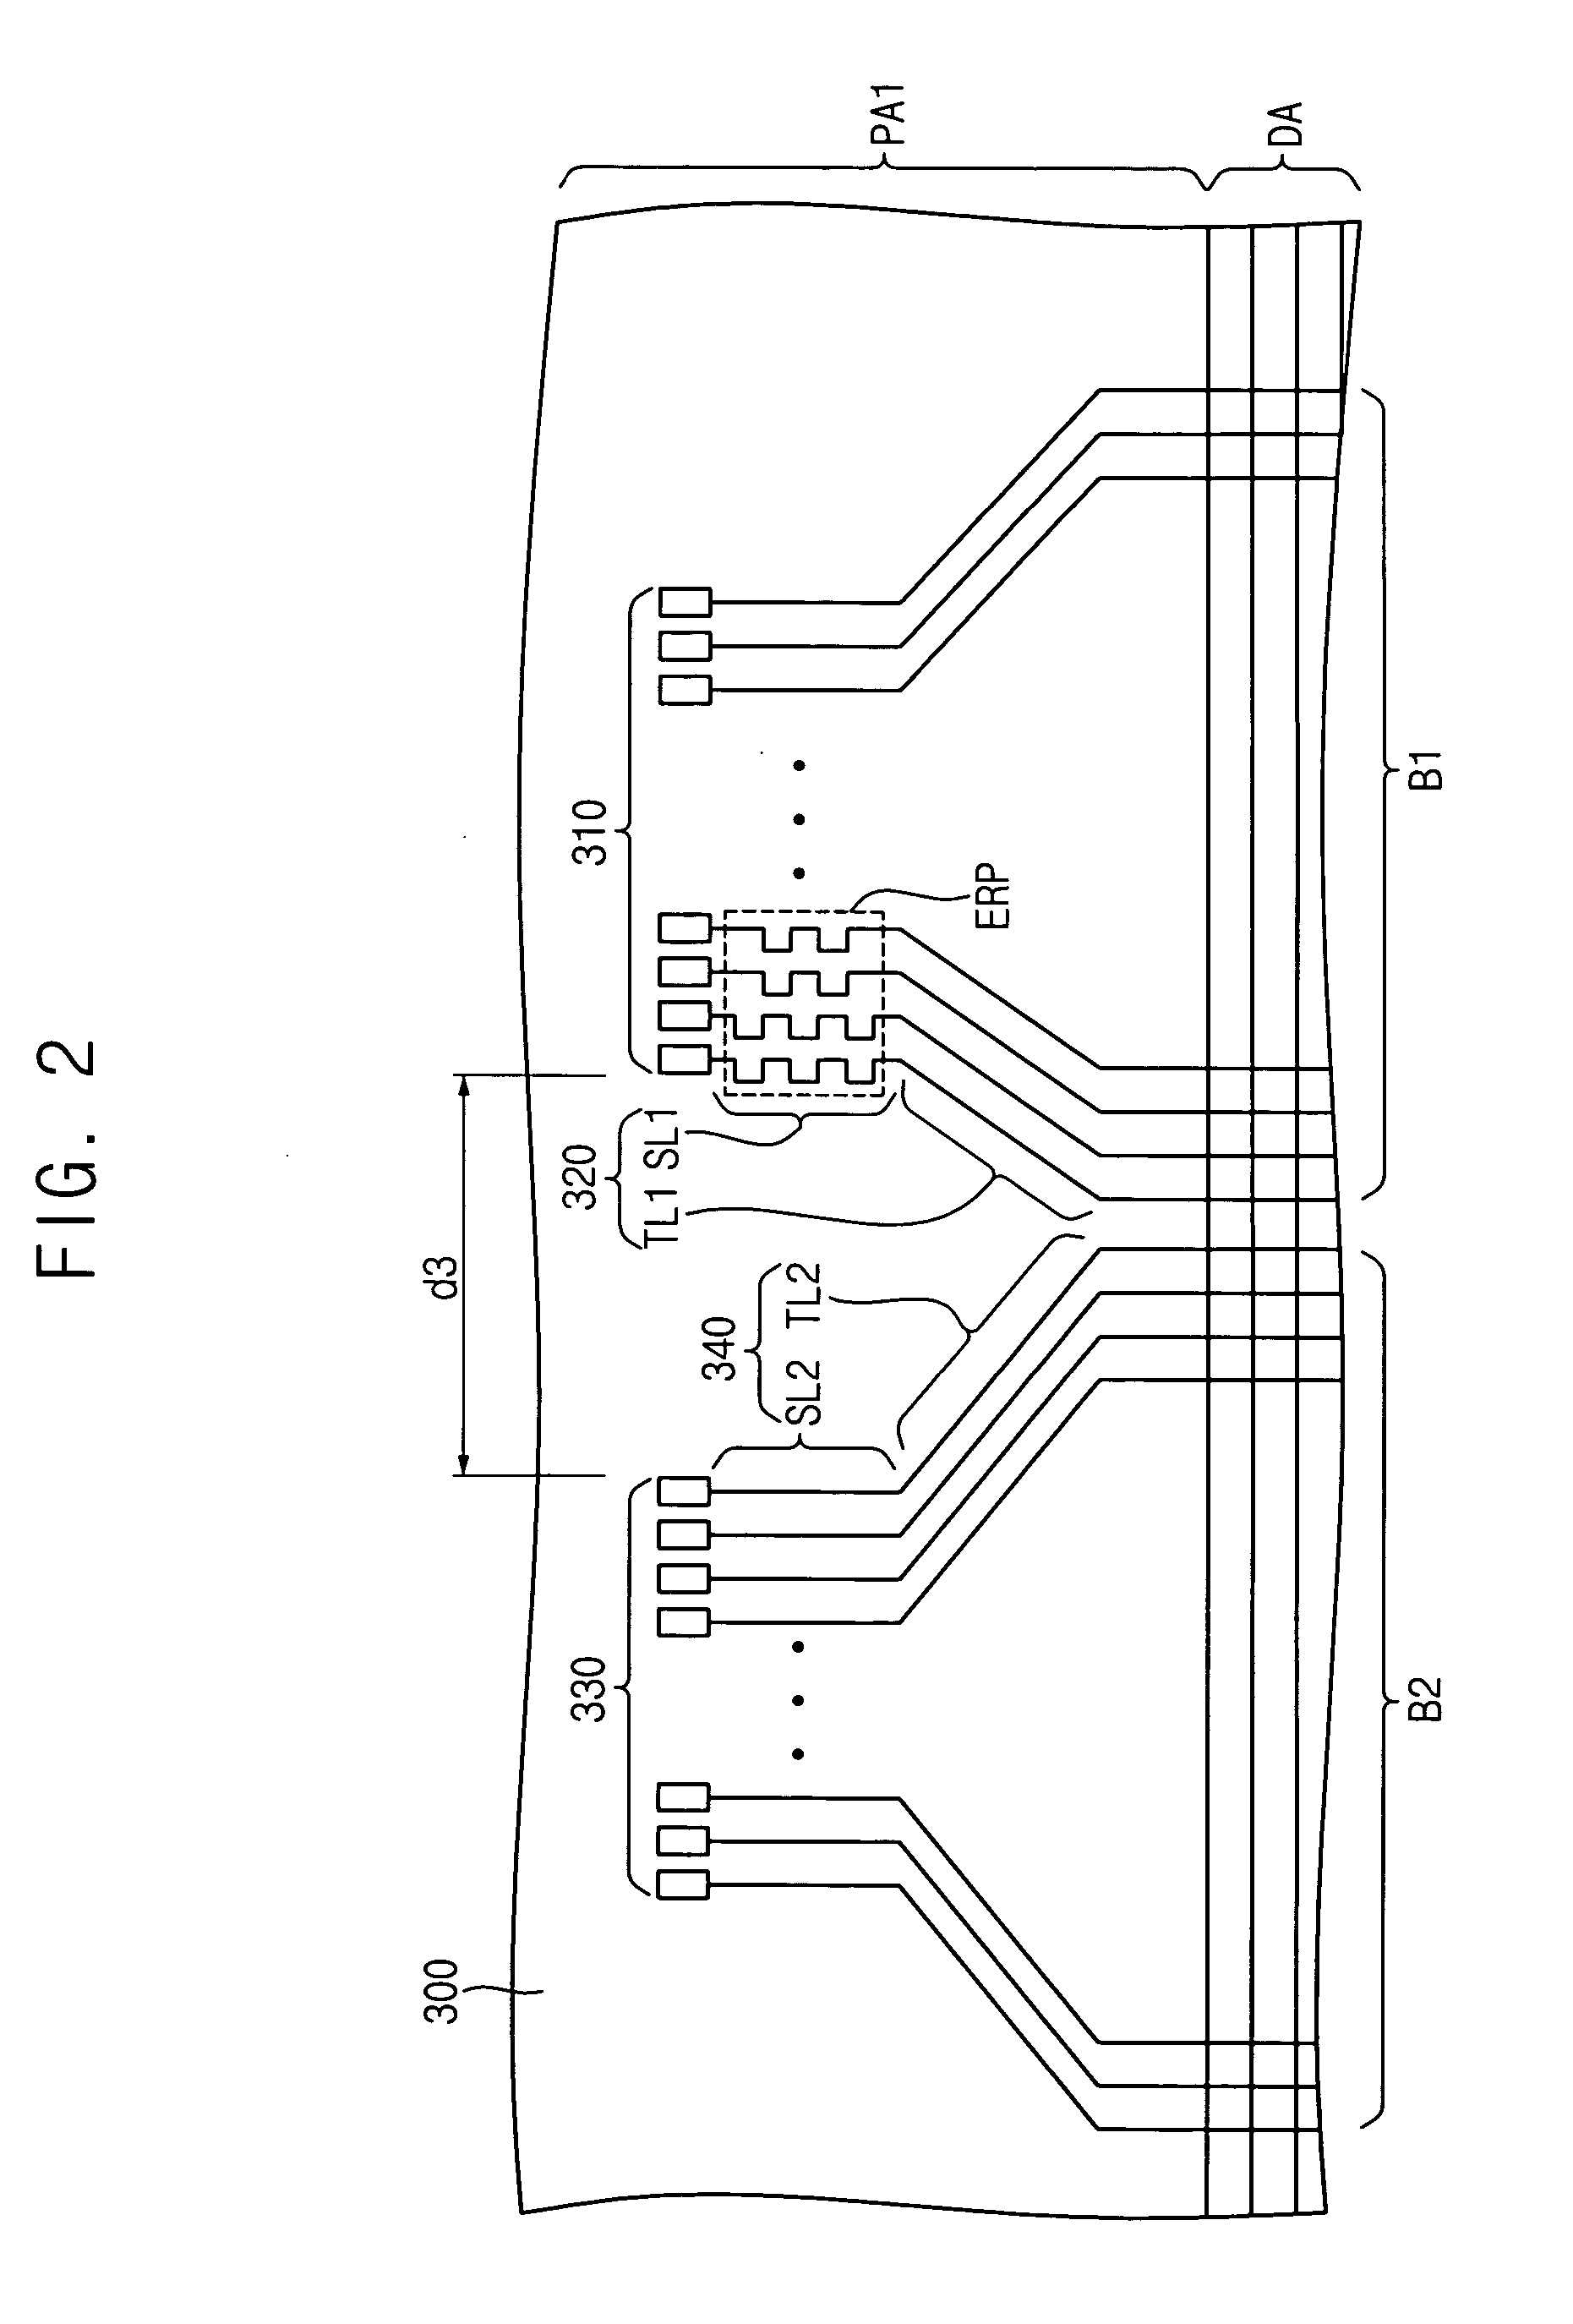 Display substrate, display device having the same, and method thereof